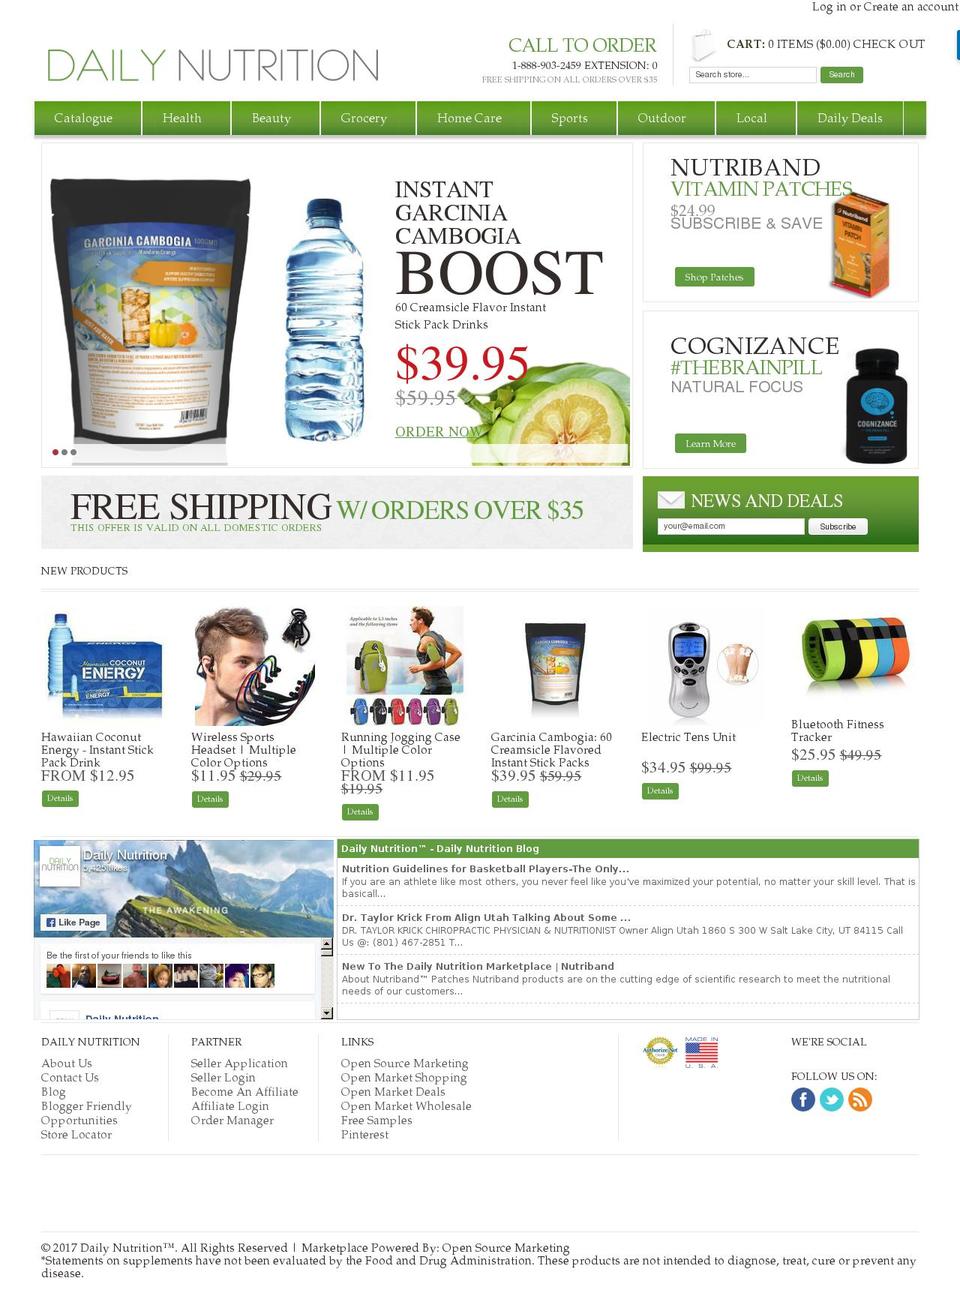 Crave Shopify theme site example dailynutritionshopping.com